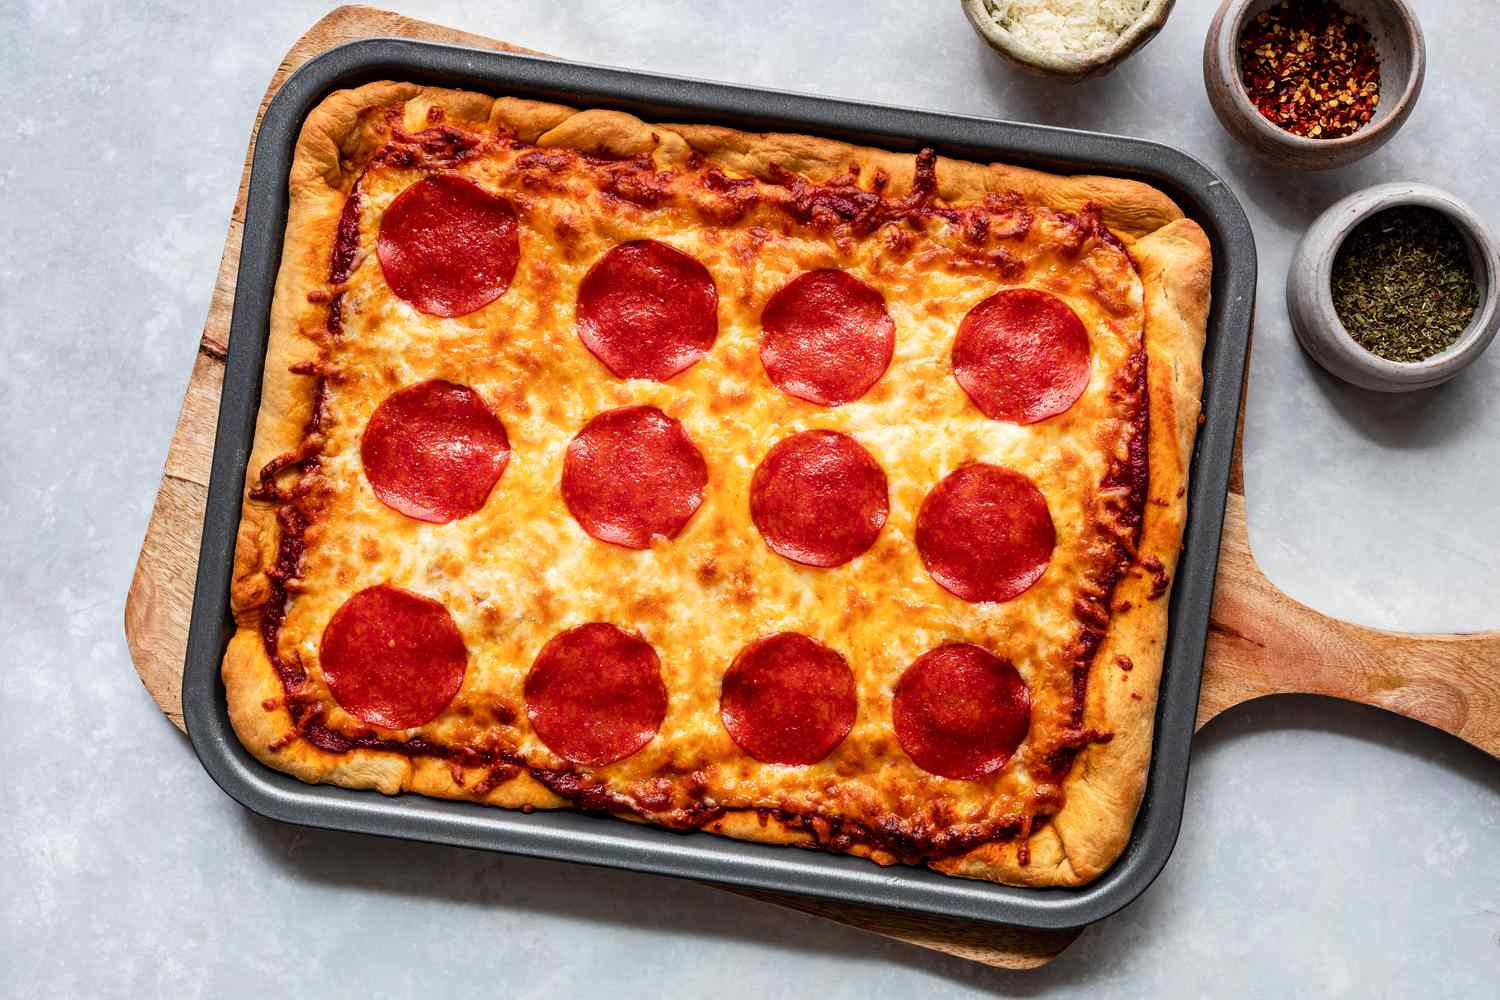 Homemade pizza baked on a sheet pan with assorted toppings.